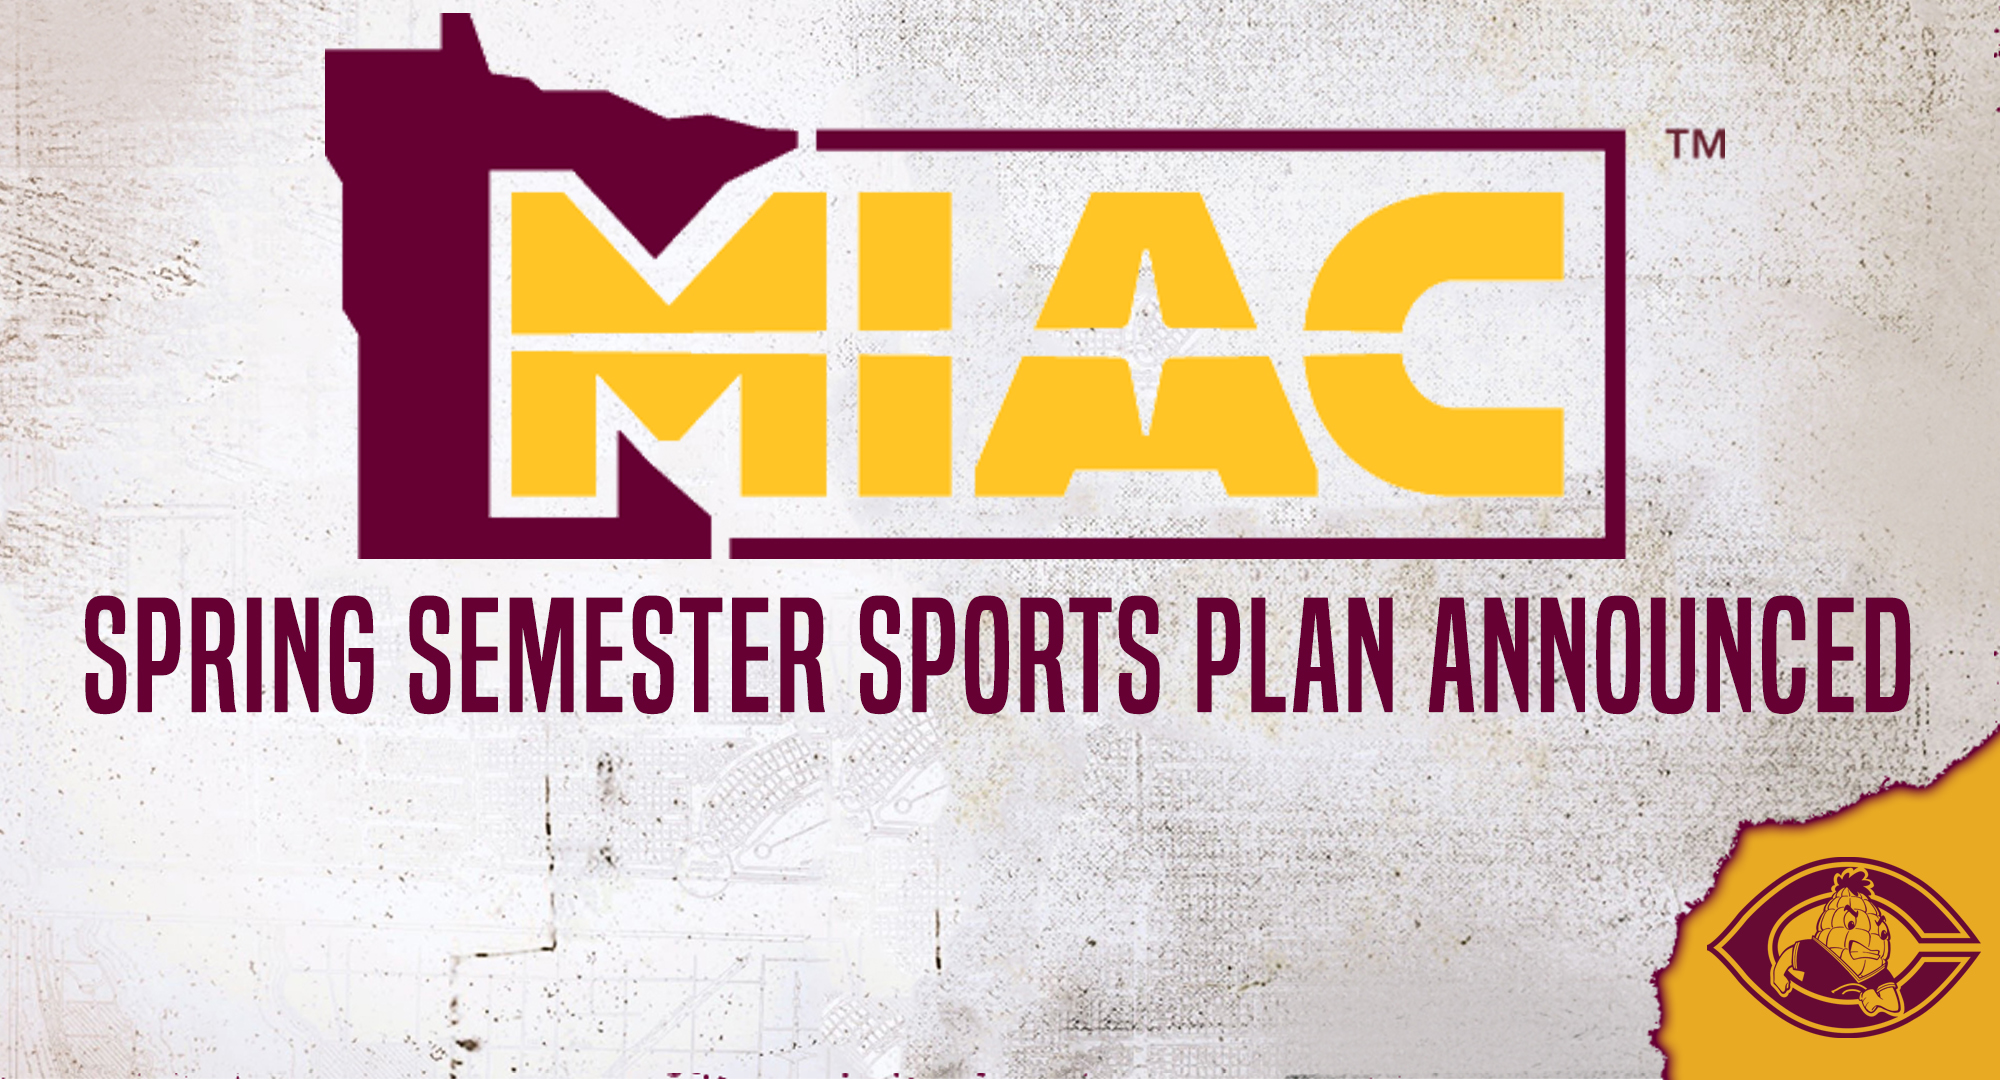 The MIAC announced the league-wide plan for the spring semester which includes both spring and fall athletic teams.